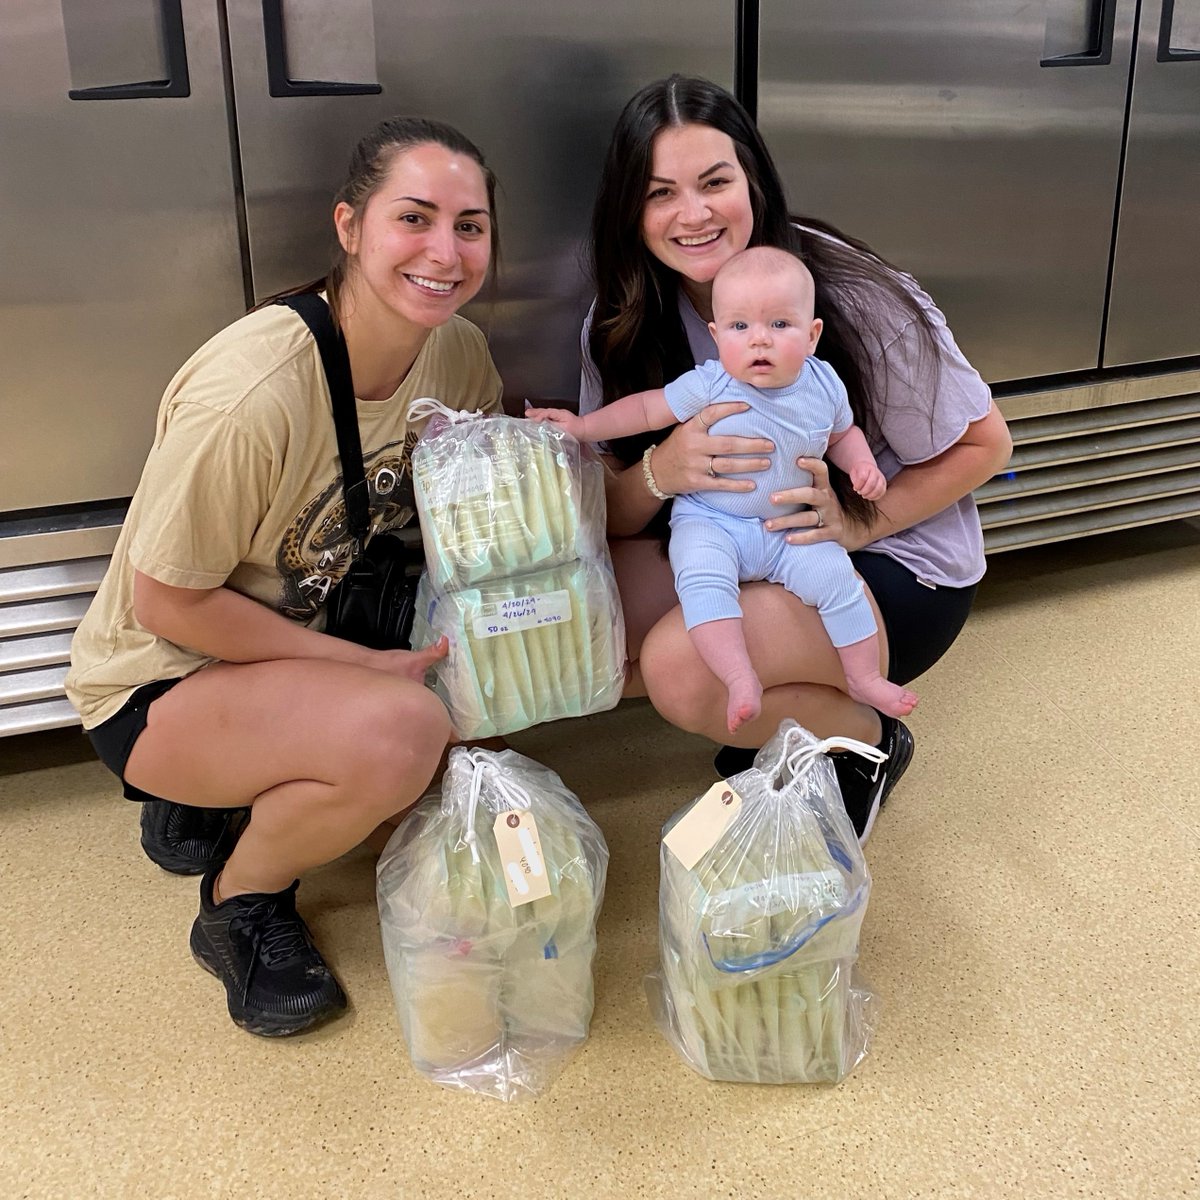 It's so much fun when milk donors bring family and friends to the milk bank. Lily- Thank you for helping nourish and support the tiniest members of our community! You are impacting so many families.  #MidAtlanticMilkDonor #donormilk #milkbank